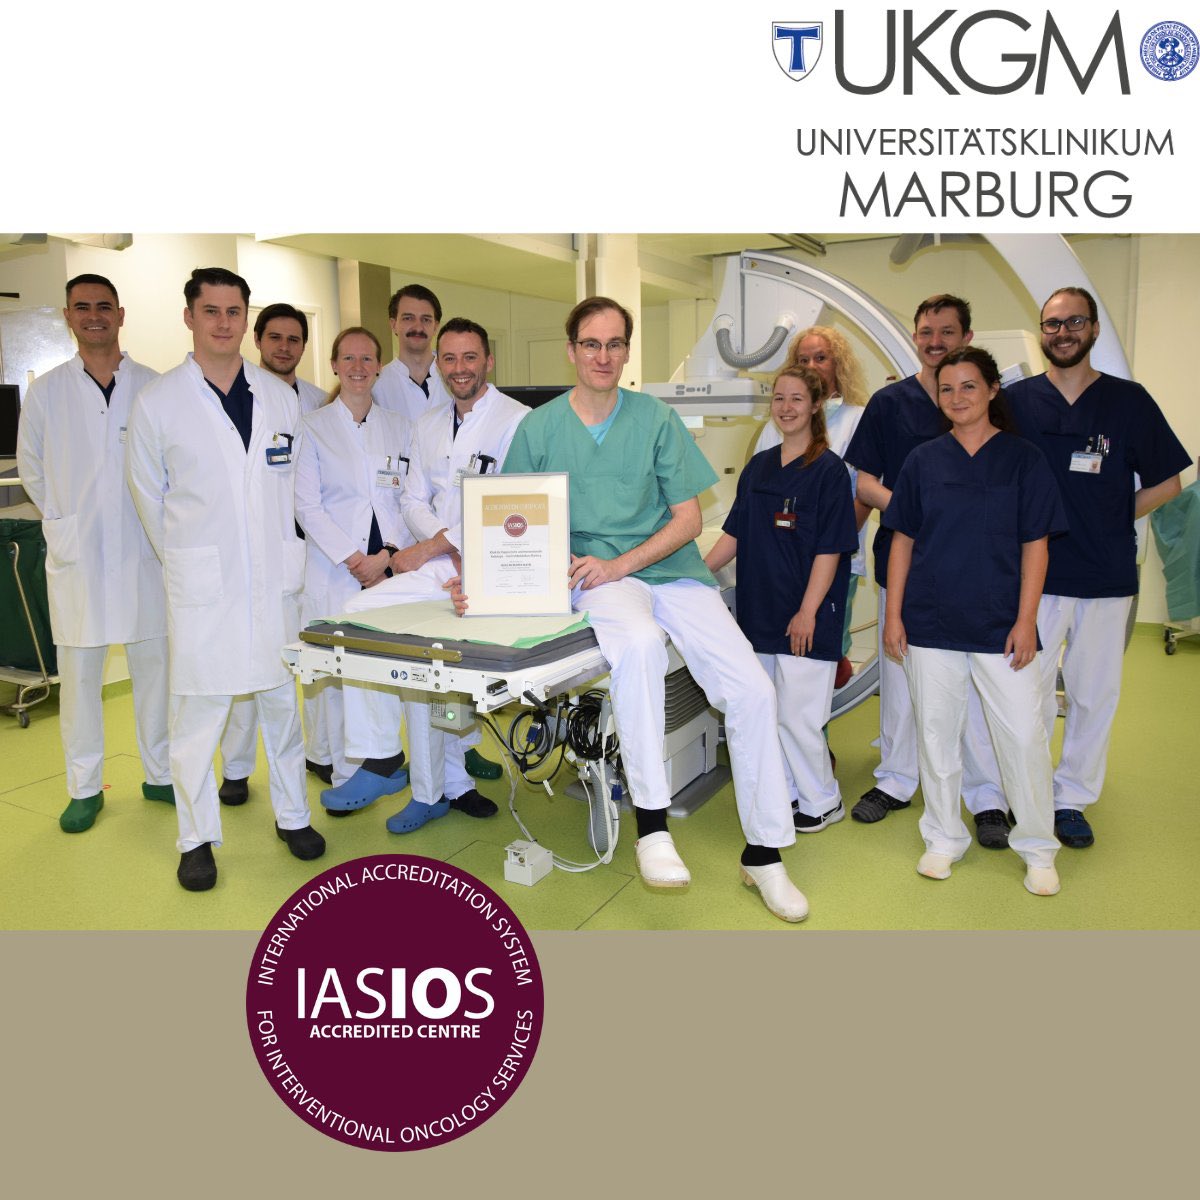 We Applaud Prof. Dr. Andreas H. Mahnken and the entire team at UKGM for achieving the IASIOS accreditation seal.